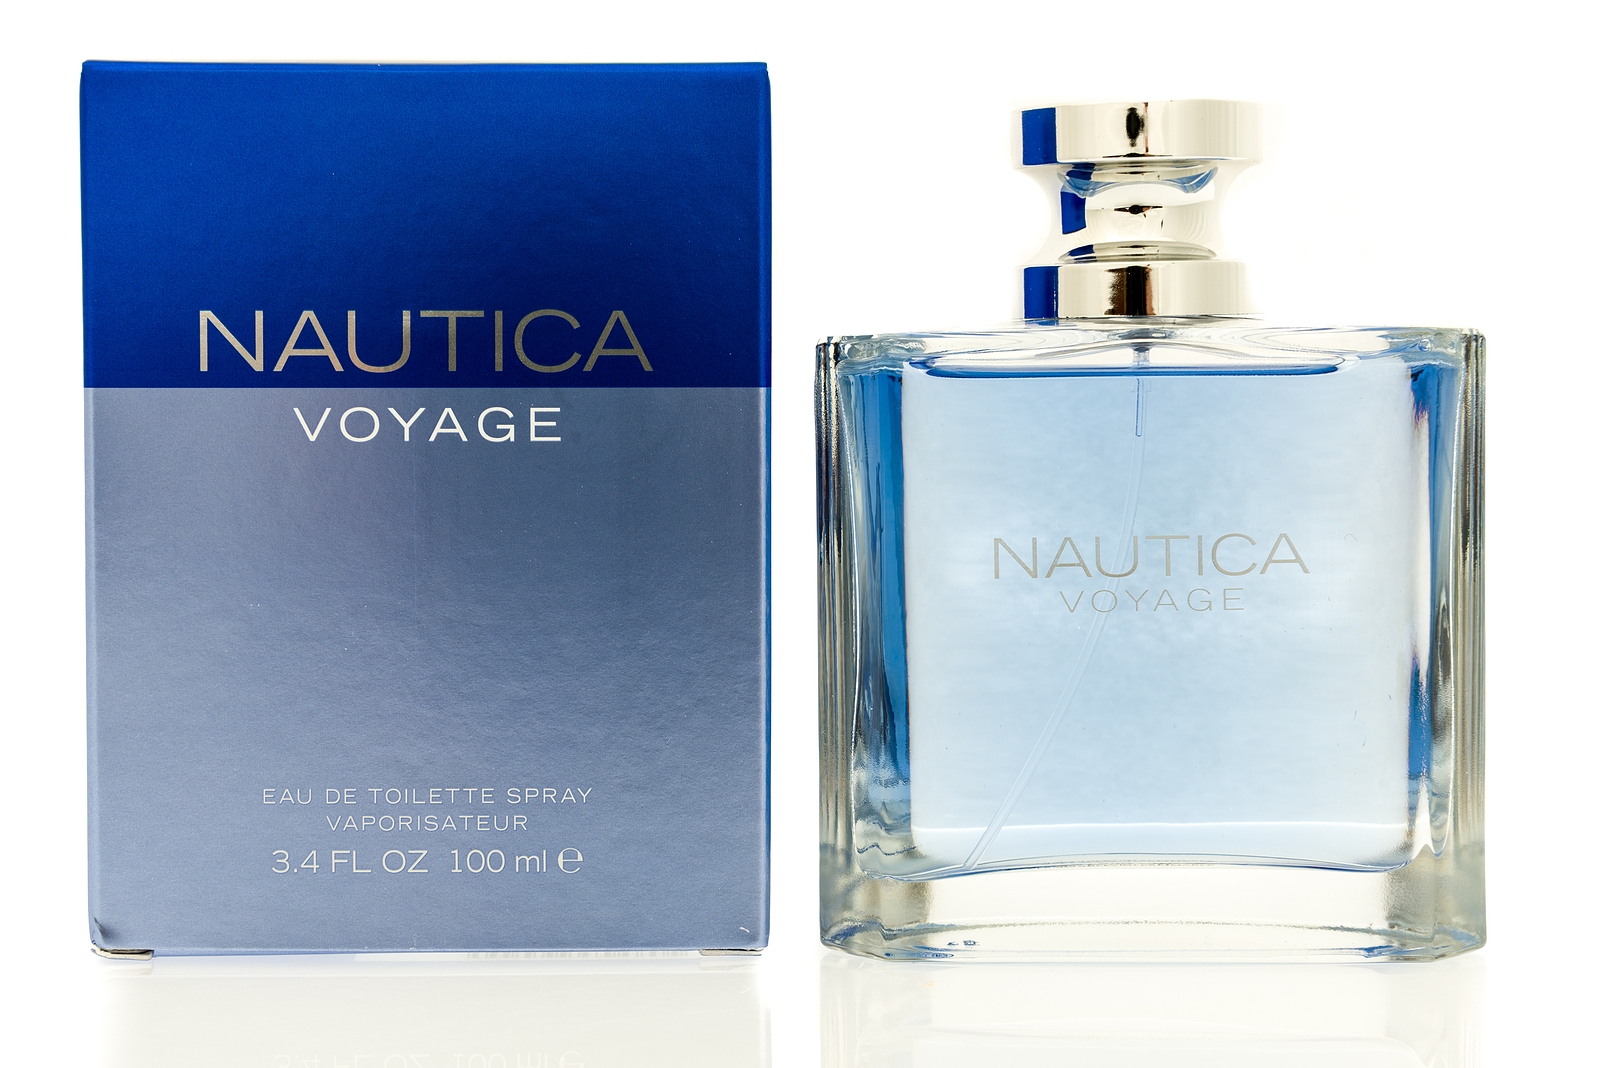 Top 6 Best High-End Luxury Perfume Brands in the World